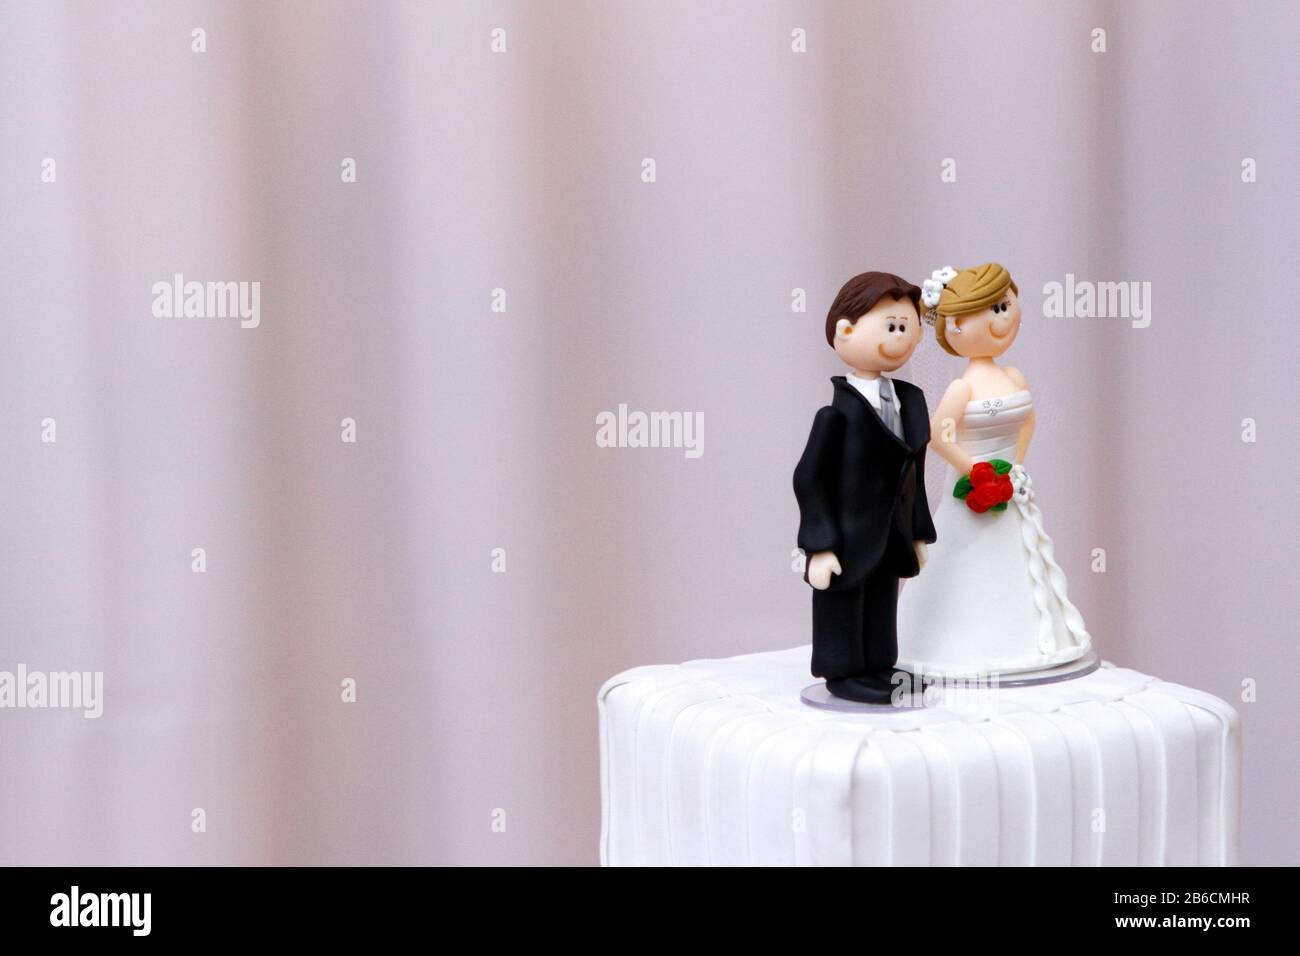 beautiful statues of bride and groom decorative wedding cake - wedding bride and groom couple doll in wedding cake Stock Photo